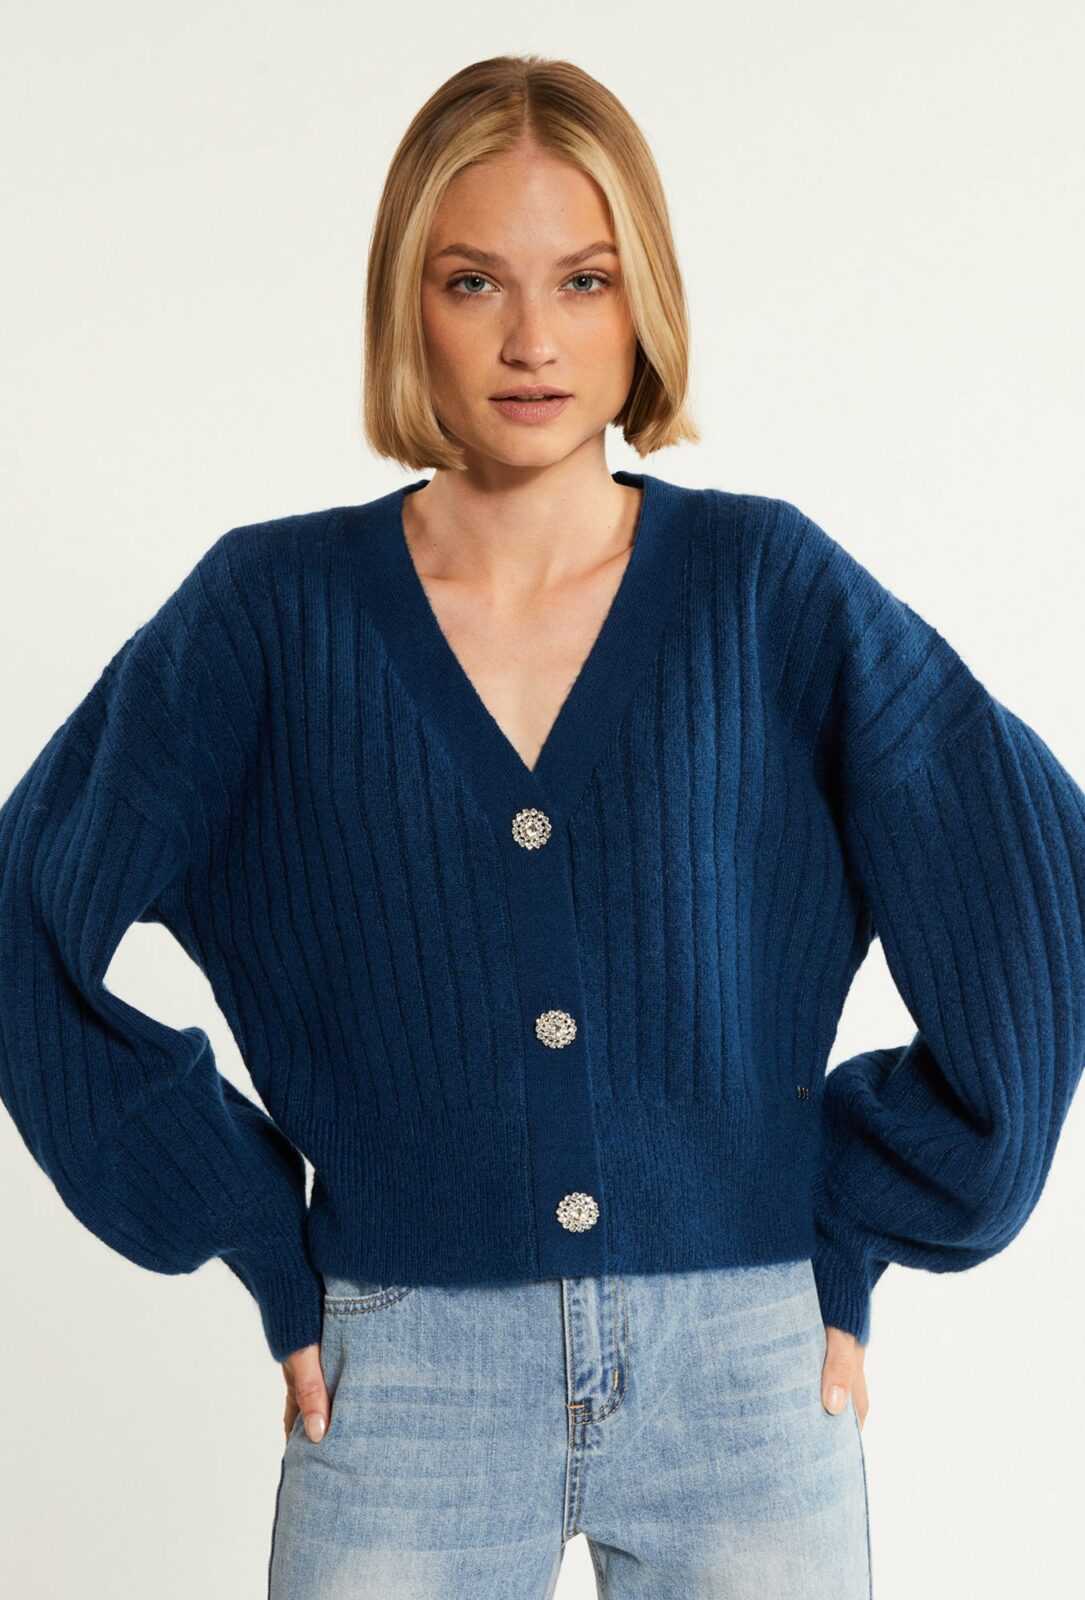 MONNARI Woman's Jumpers & Cardigans Sweater With